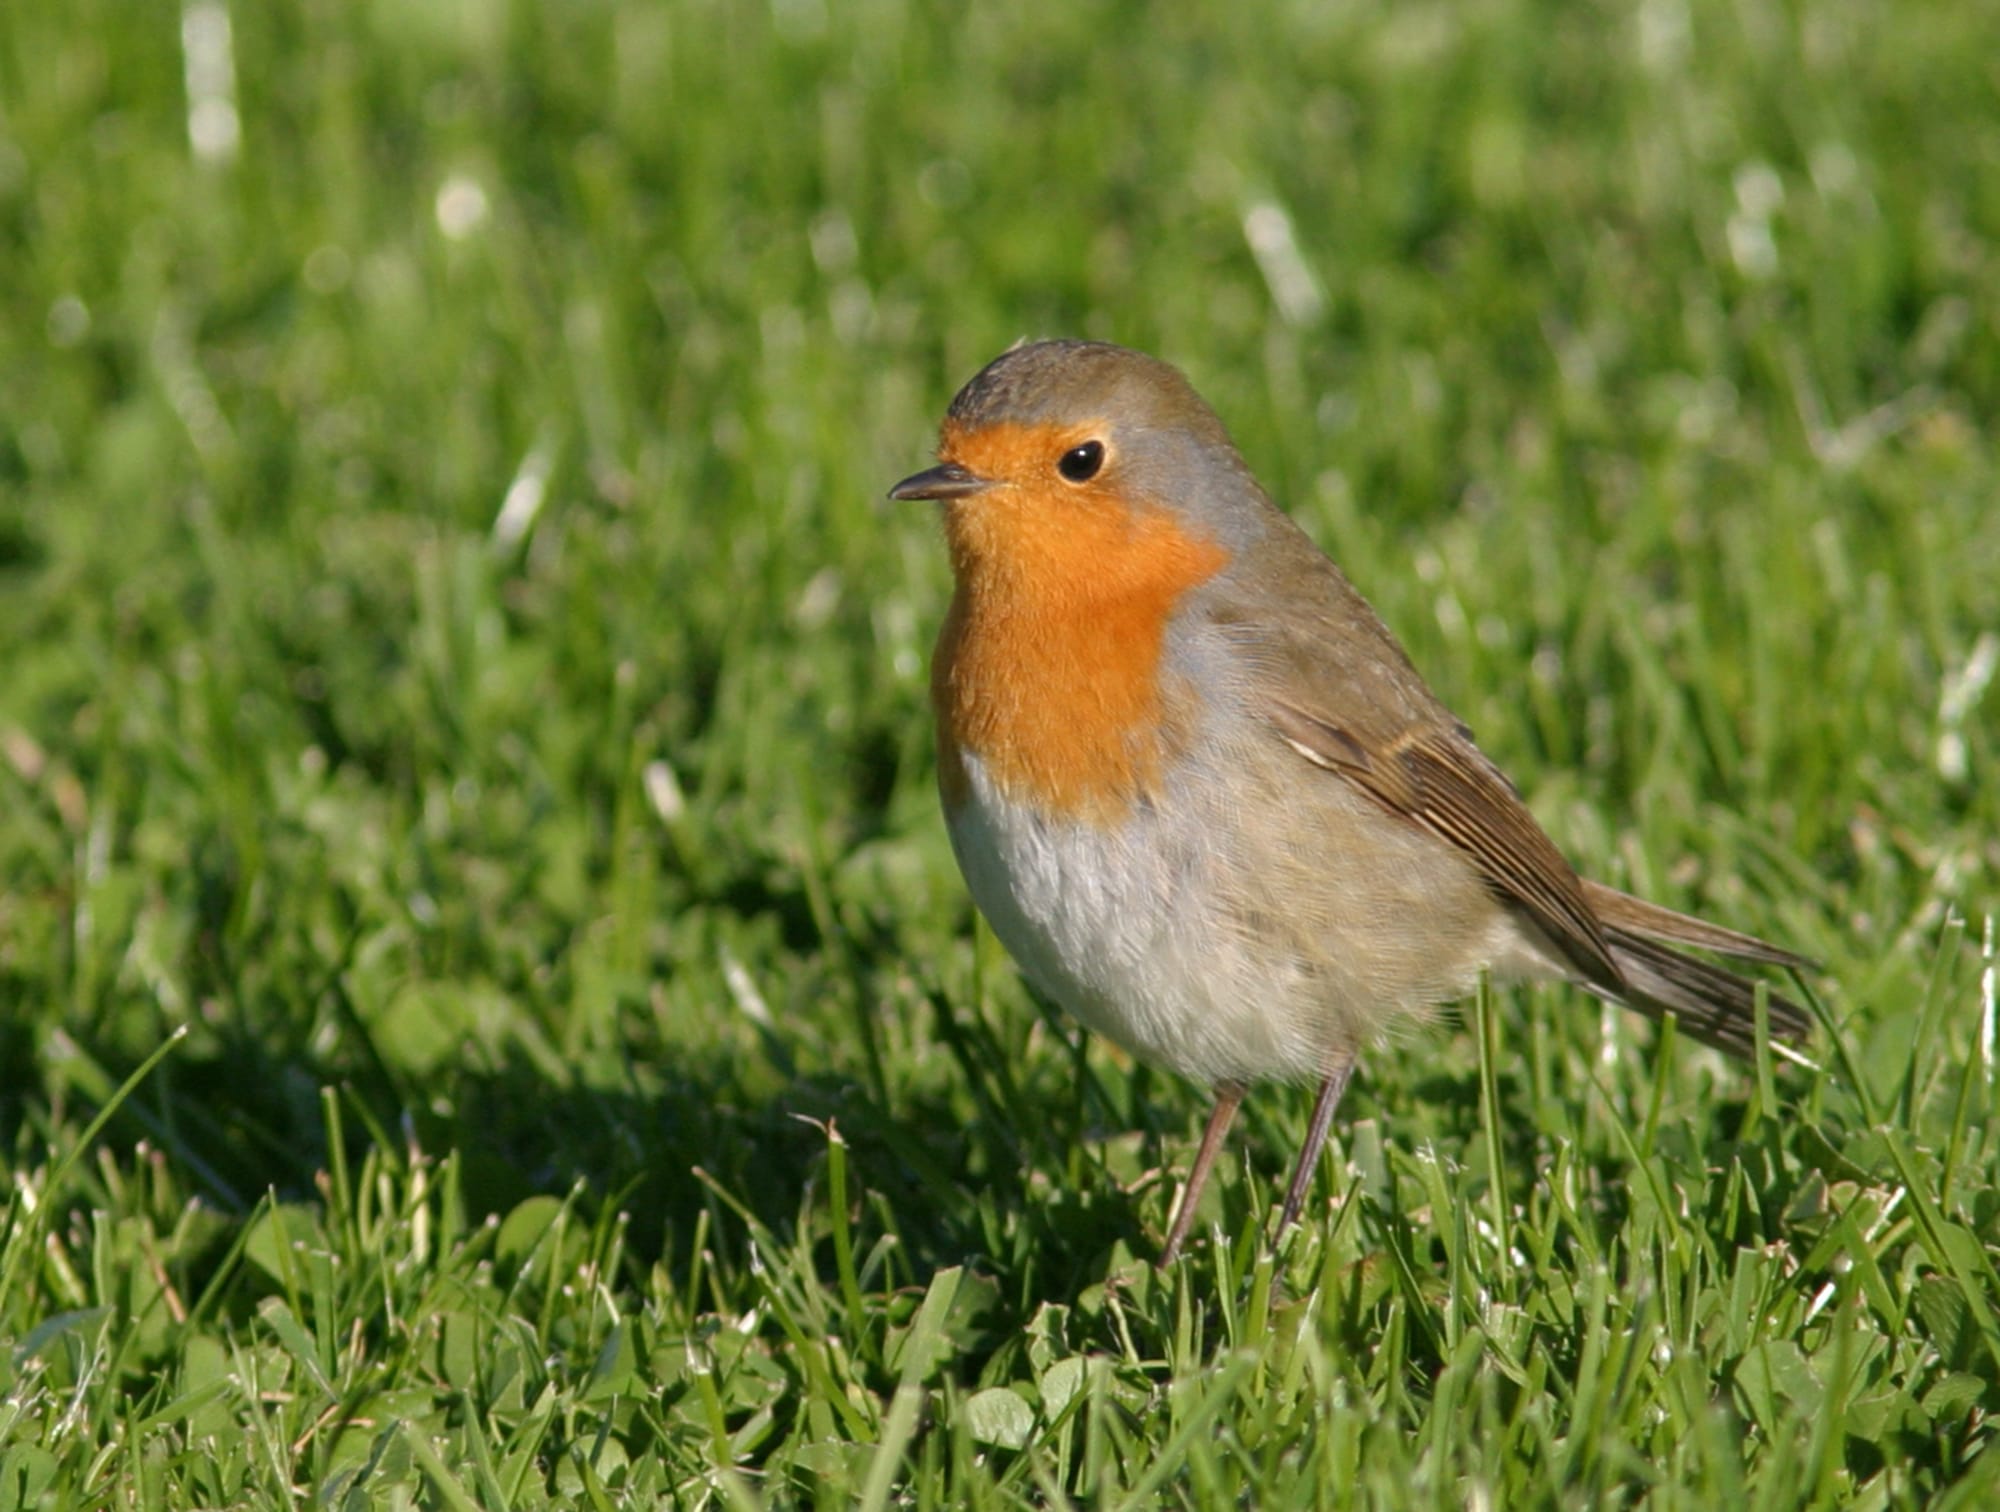 Henrik Mouritsen
European robins, such as this one, cannot use their magnetic compass when it is exposed to urban electromagnetic noise in the AM radio frequency range.